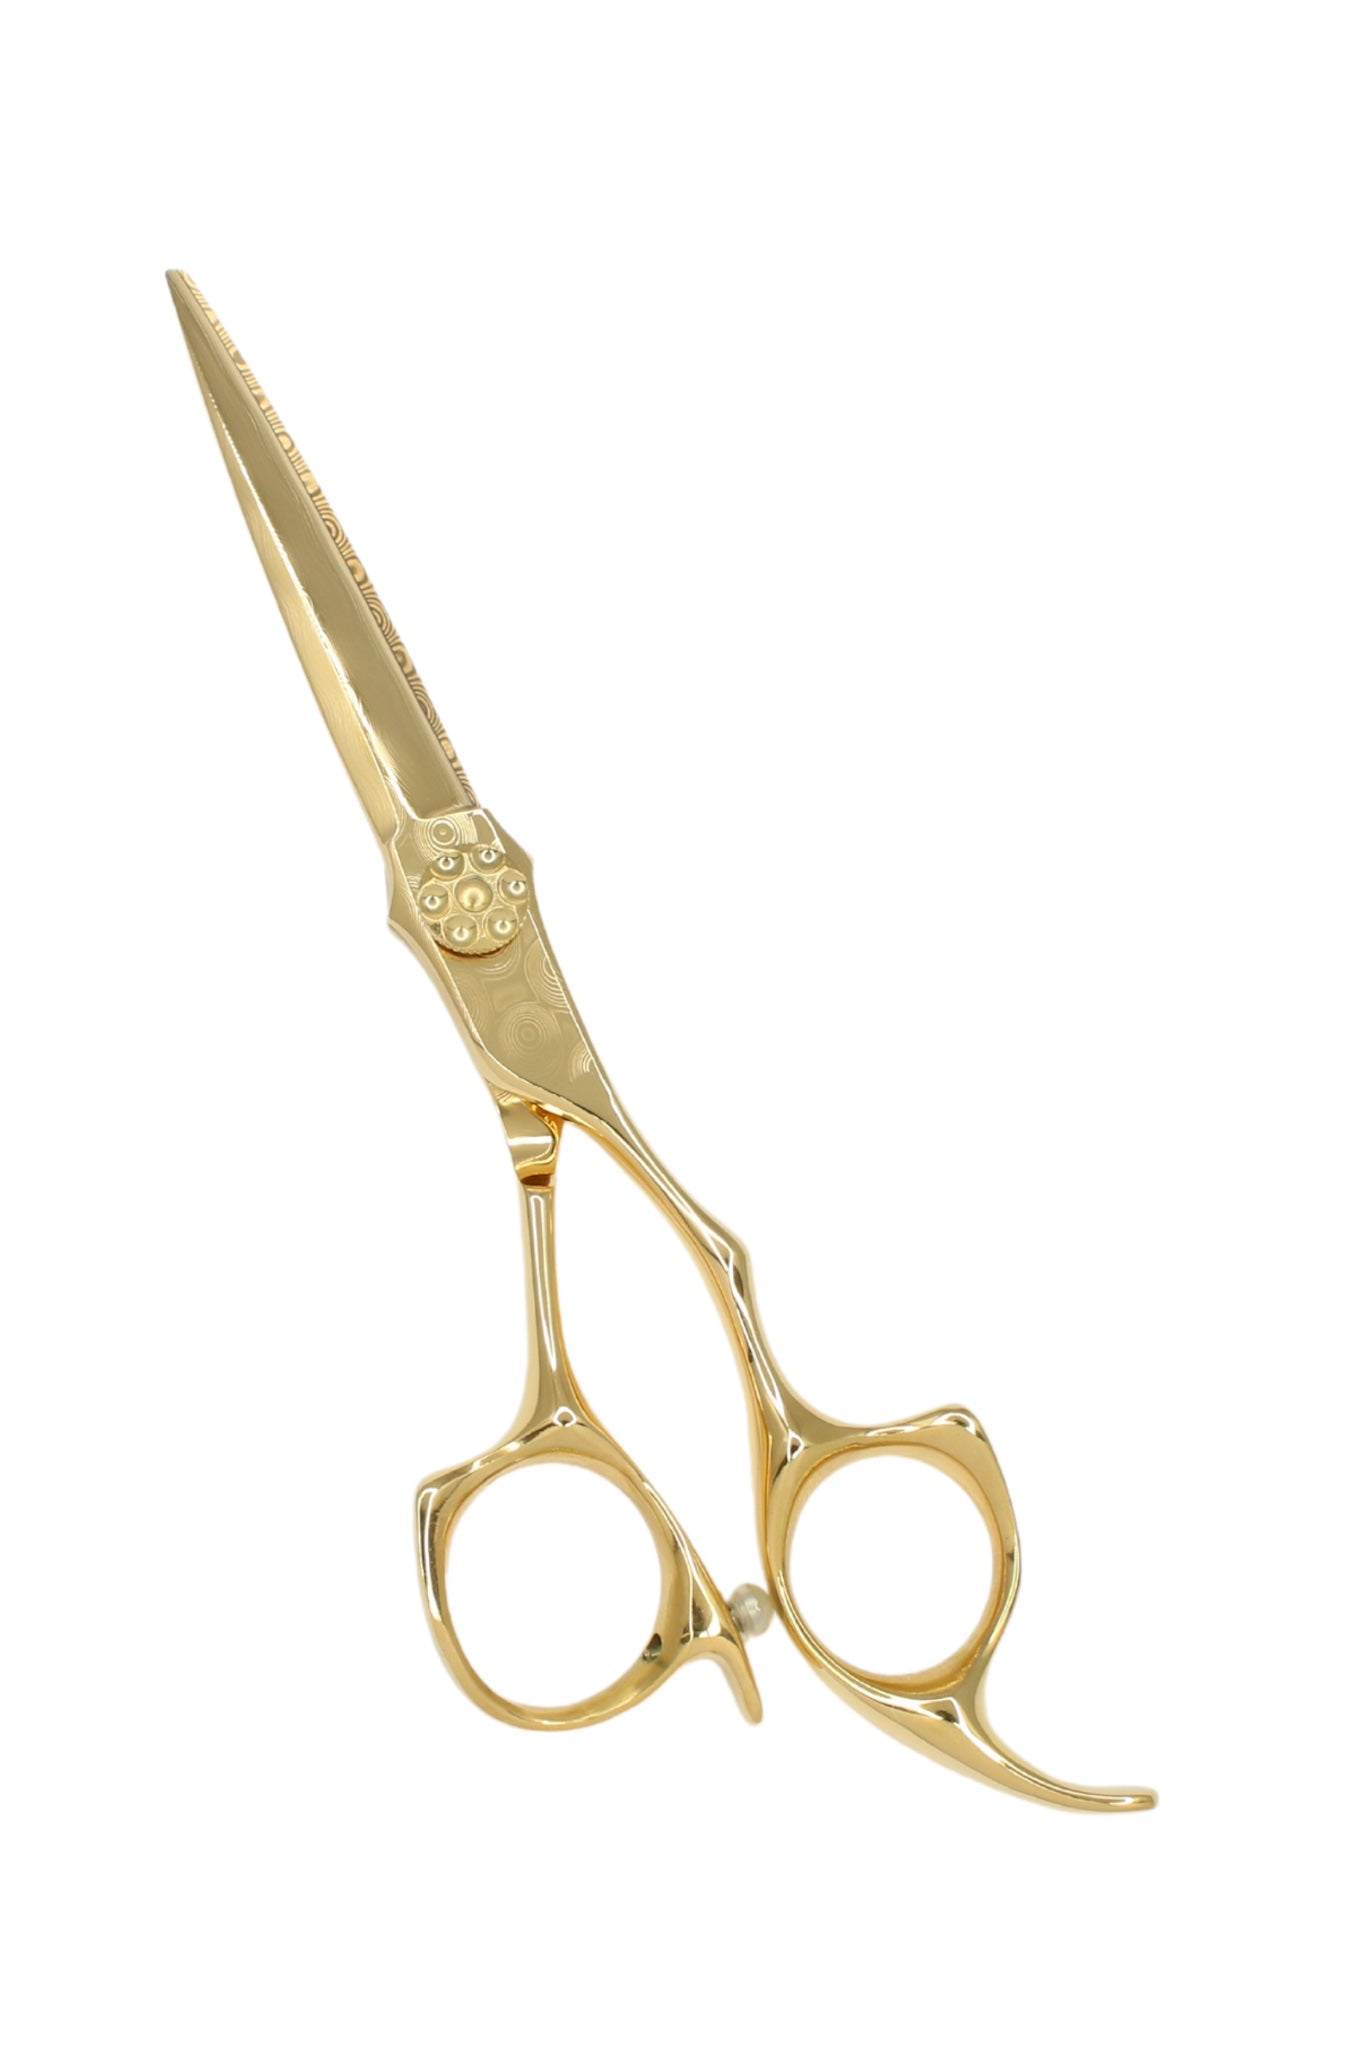 iCandy DAMASCUS ALL STAR Yellow Gold Scissor 6.0" Pic1